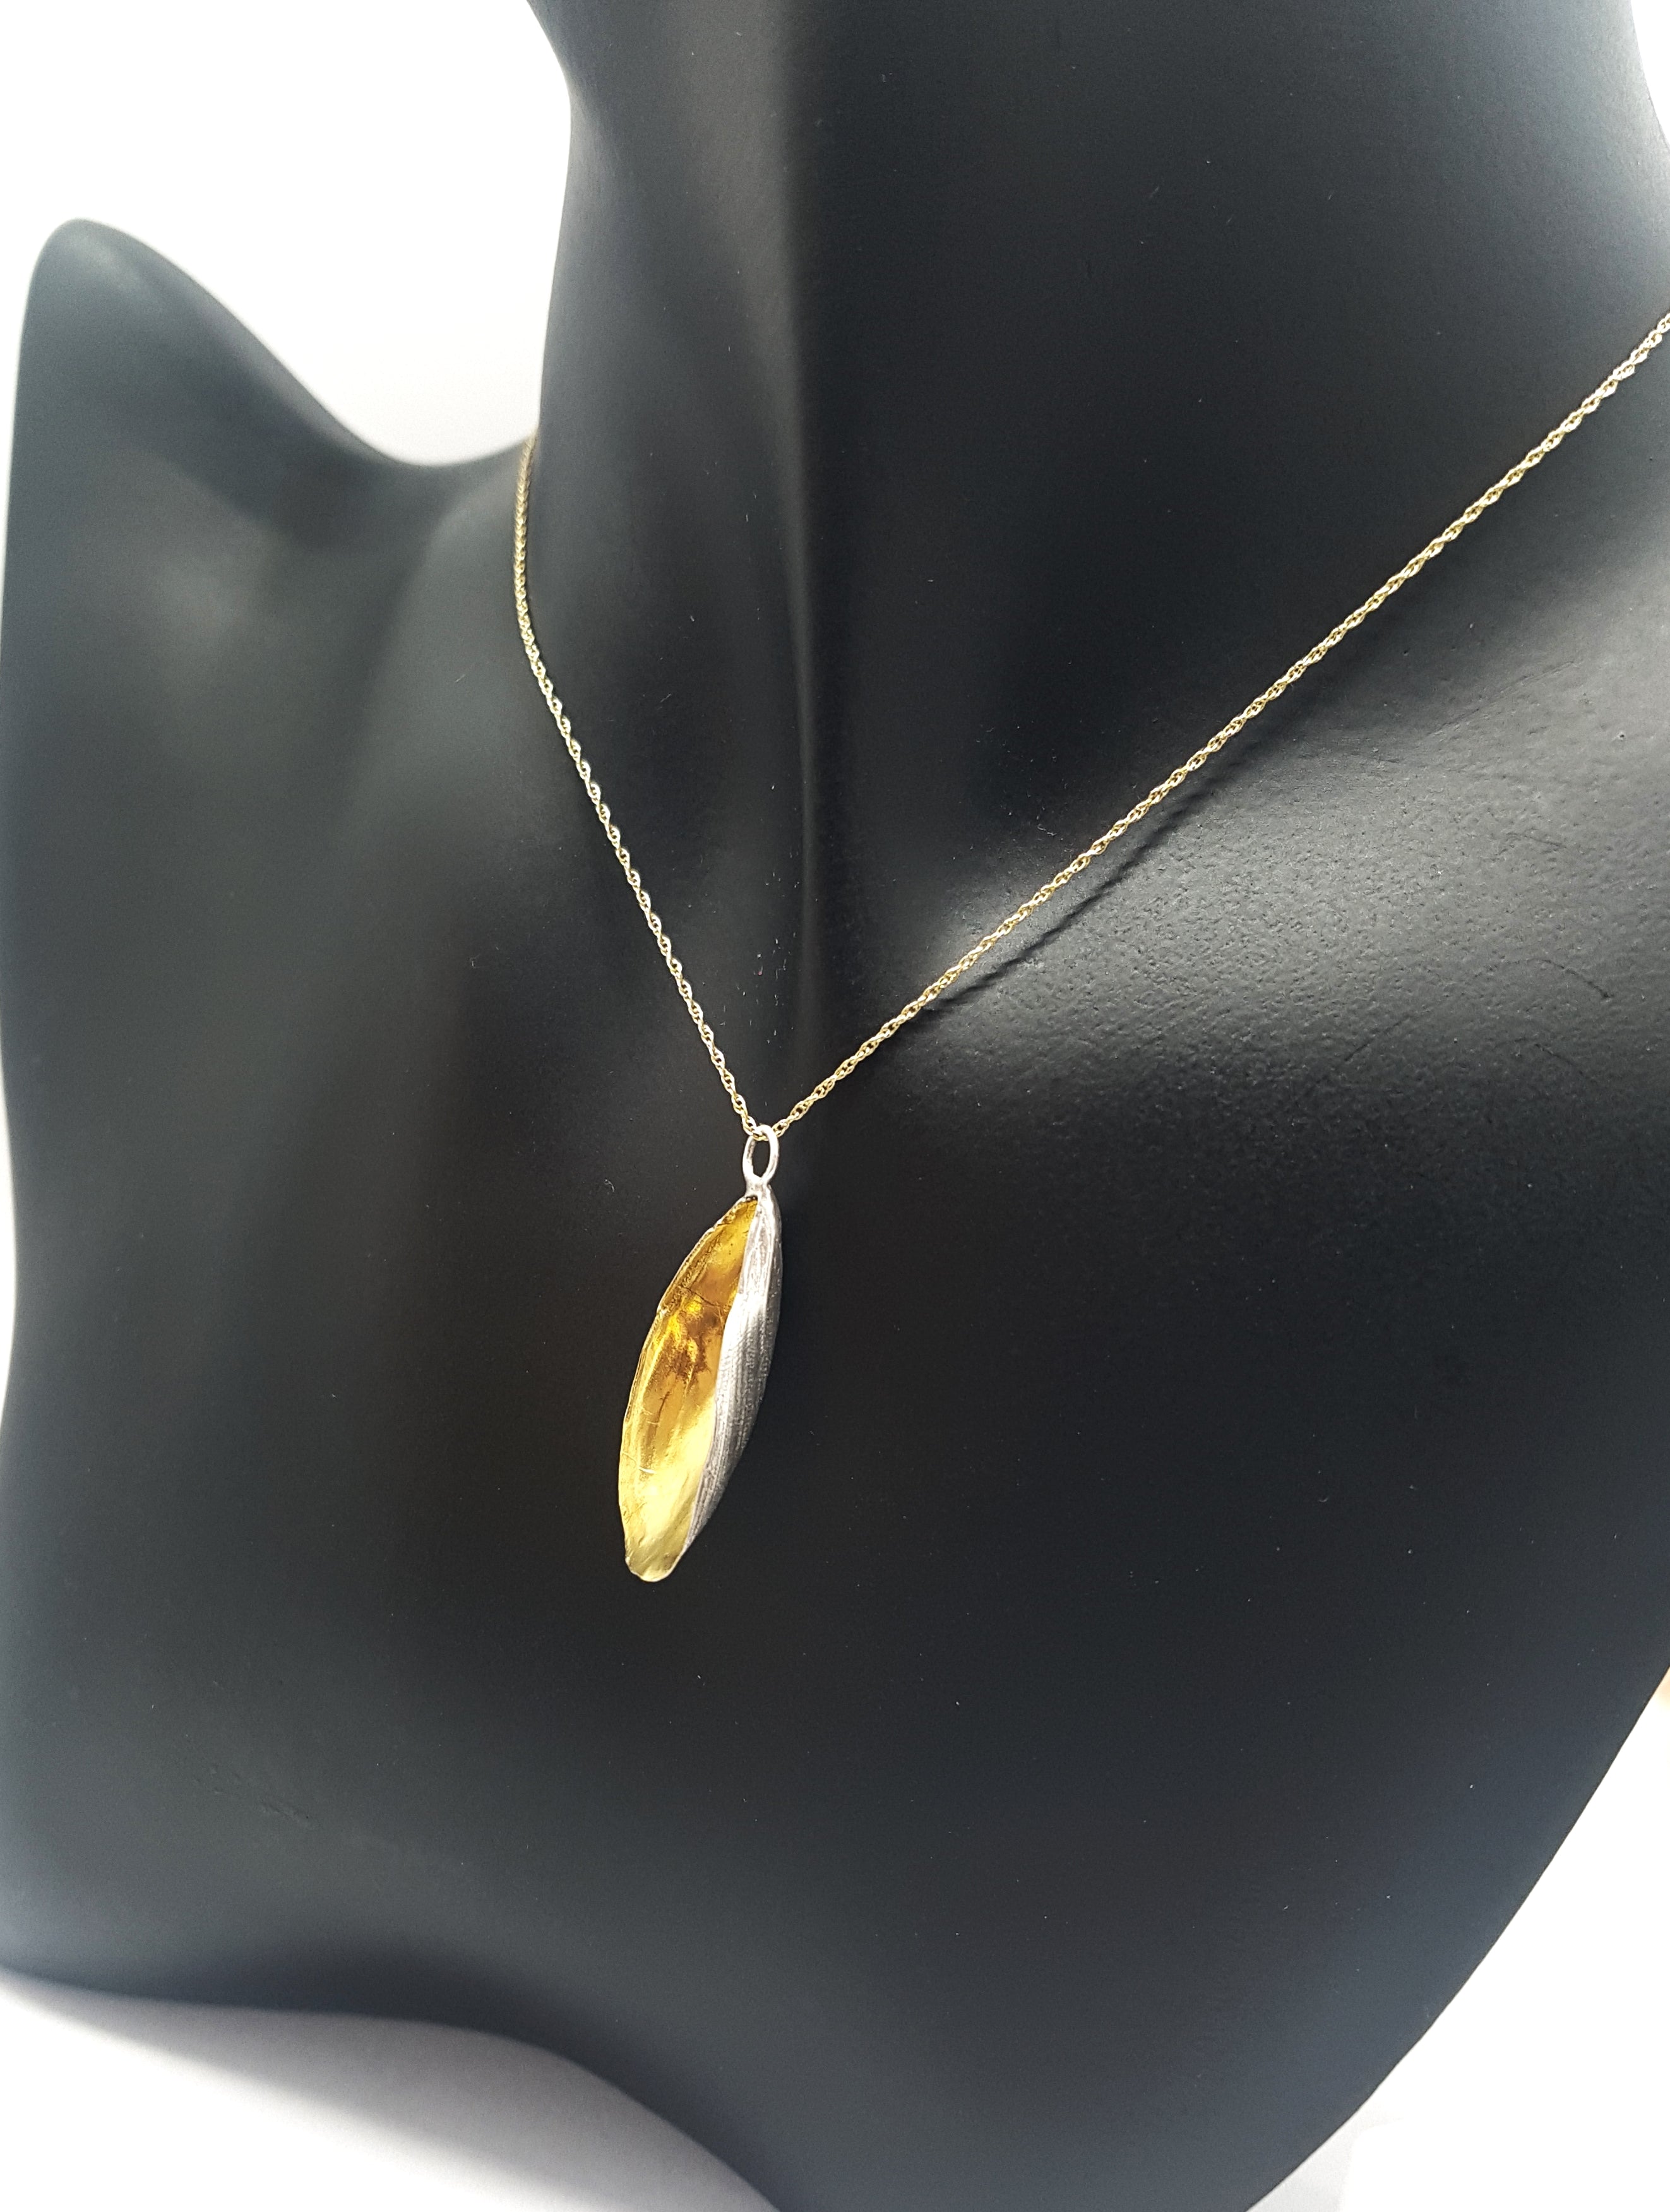 Mussel Shell Necklace - Gold and Silver